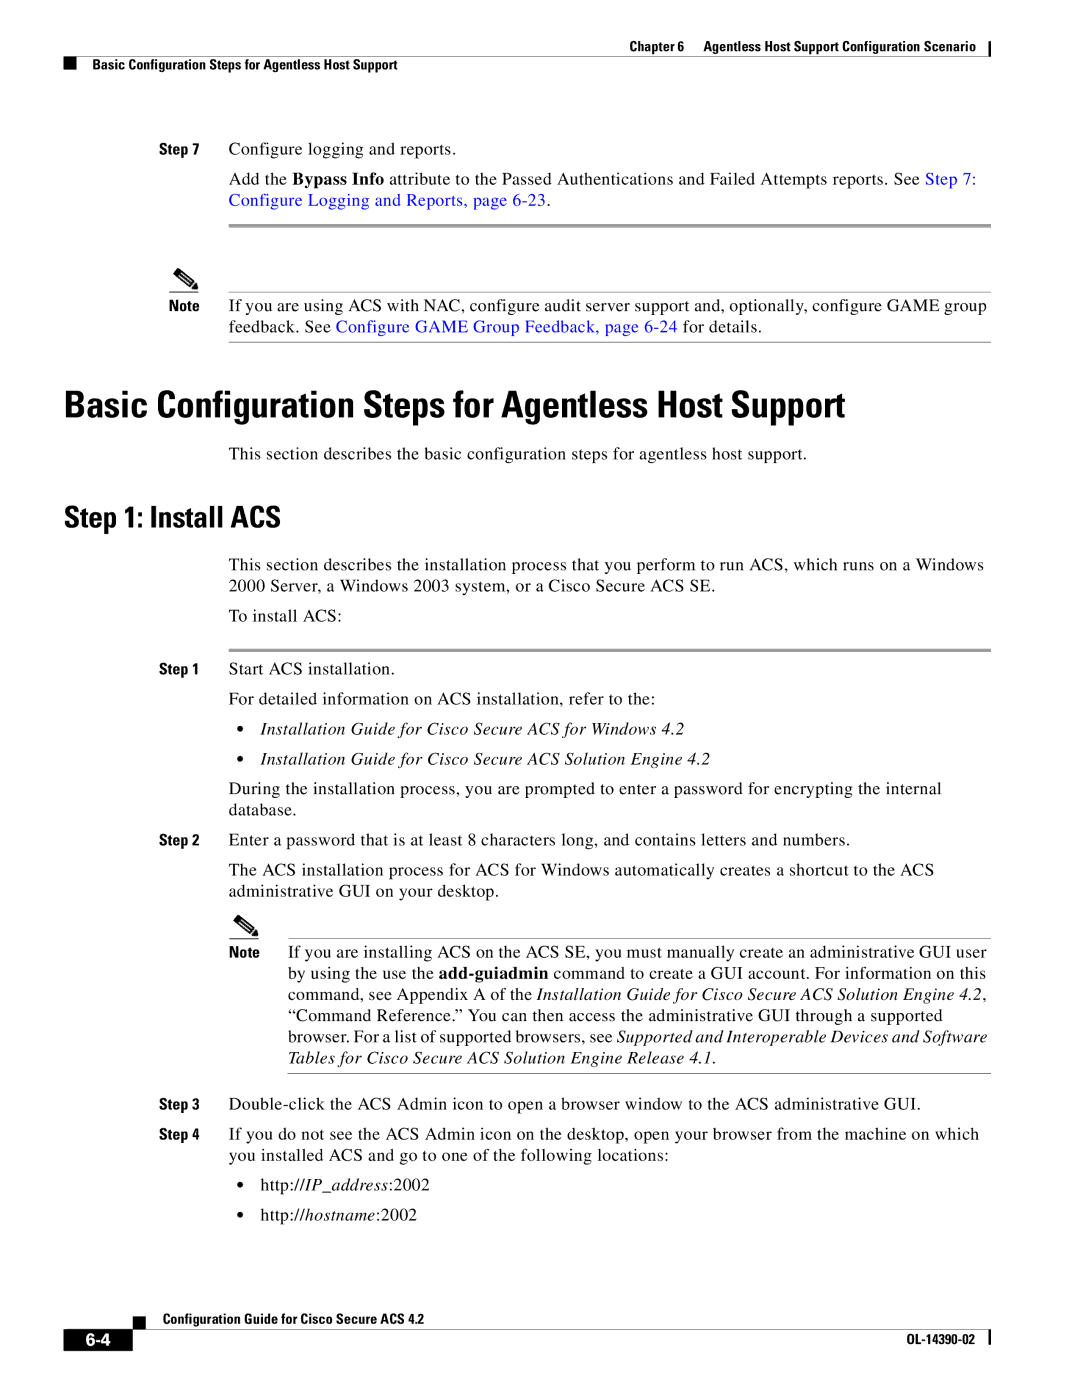 Cisco Systems 4.2 manual Basic Configuration Steps for Agentless Host Support, Install ACS 